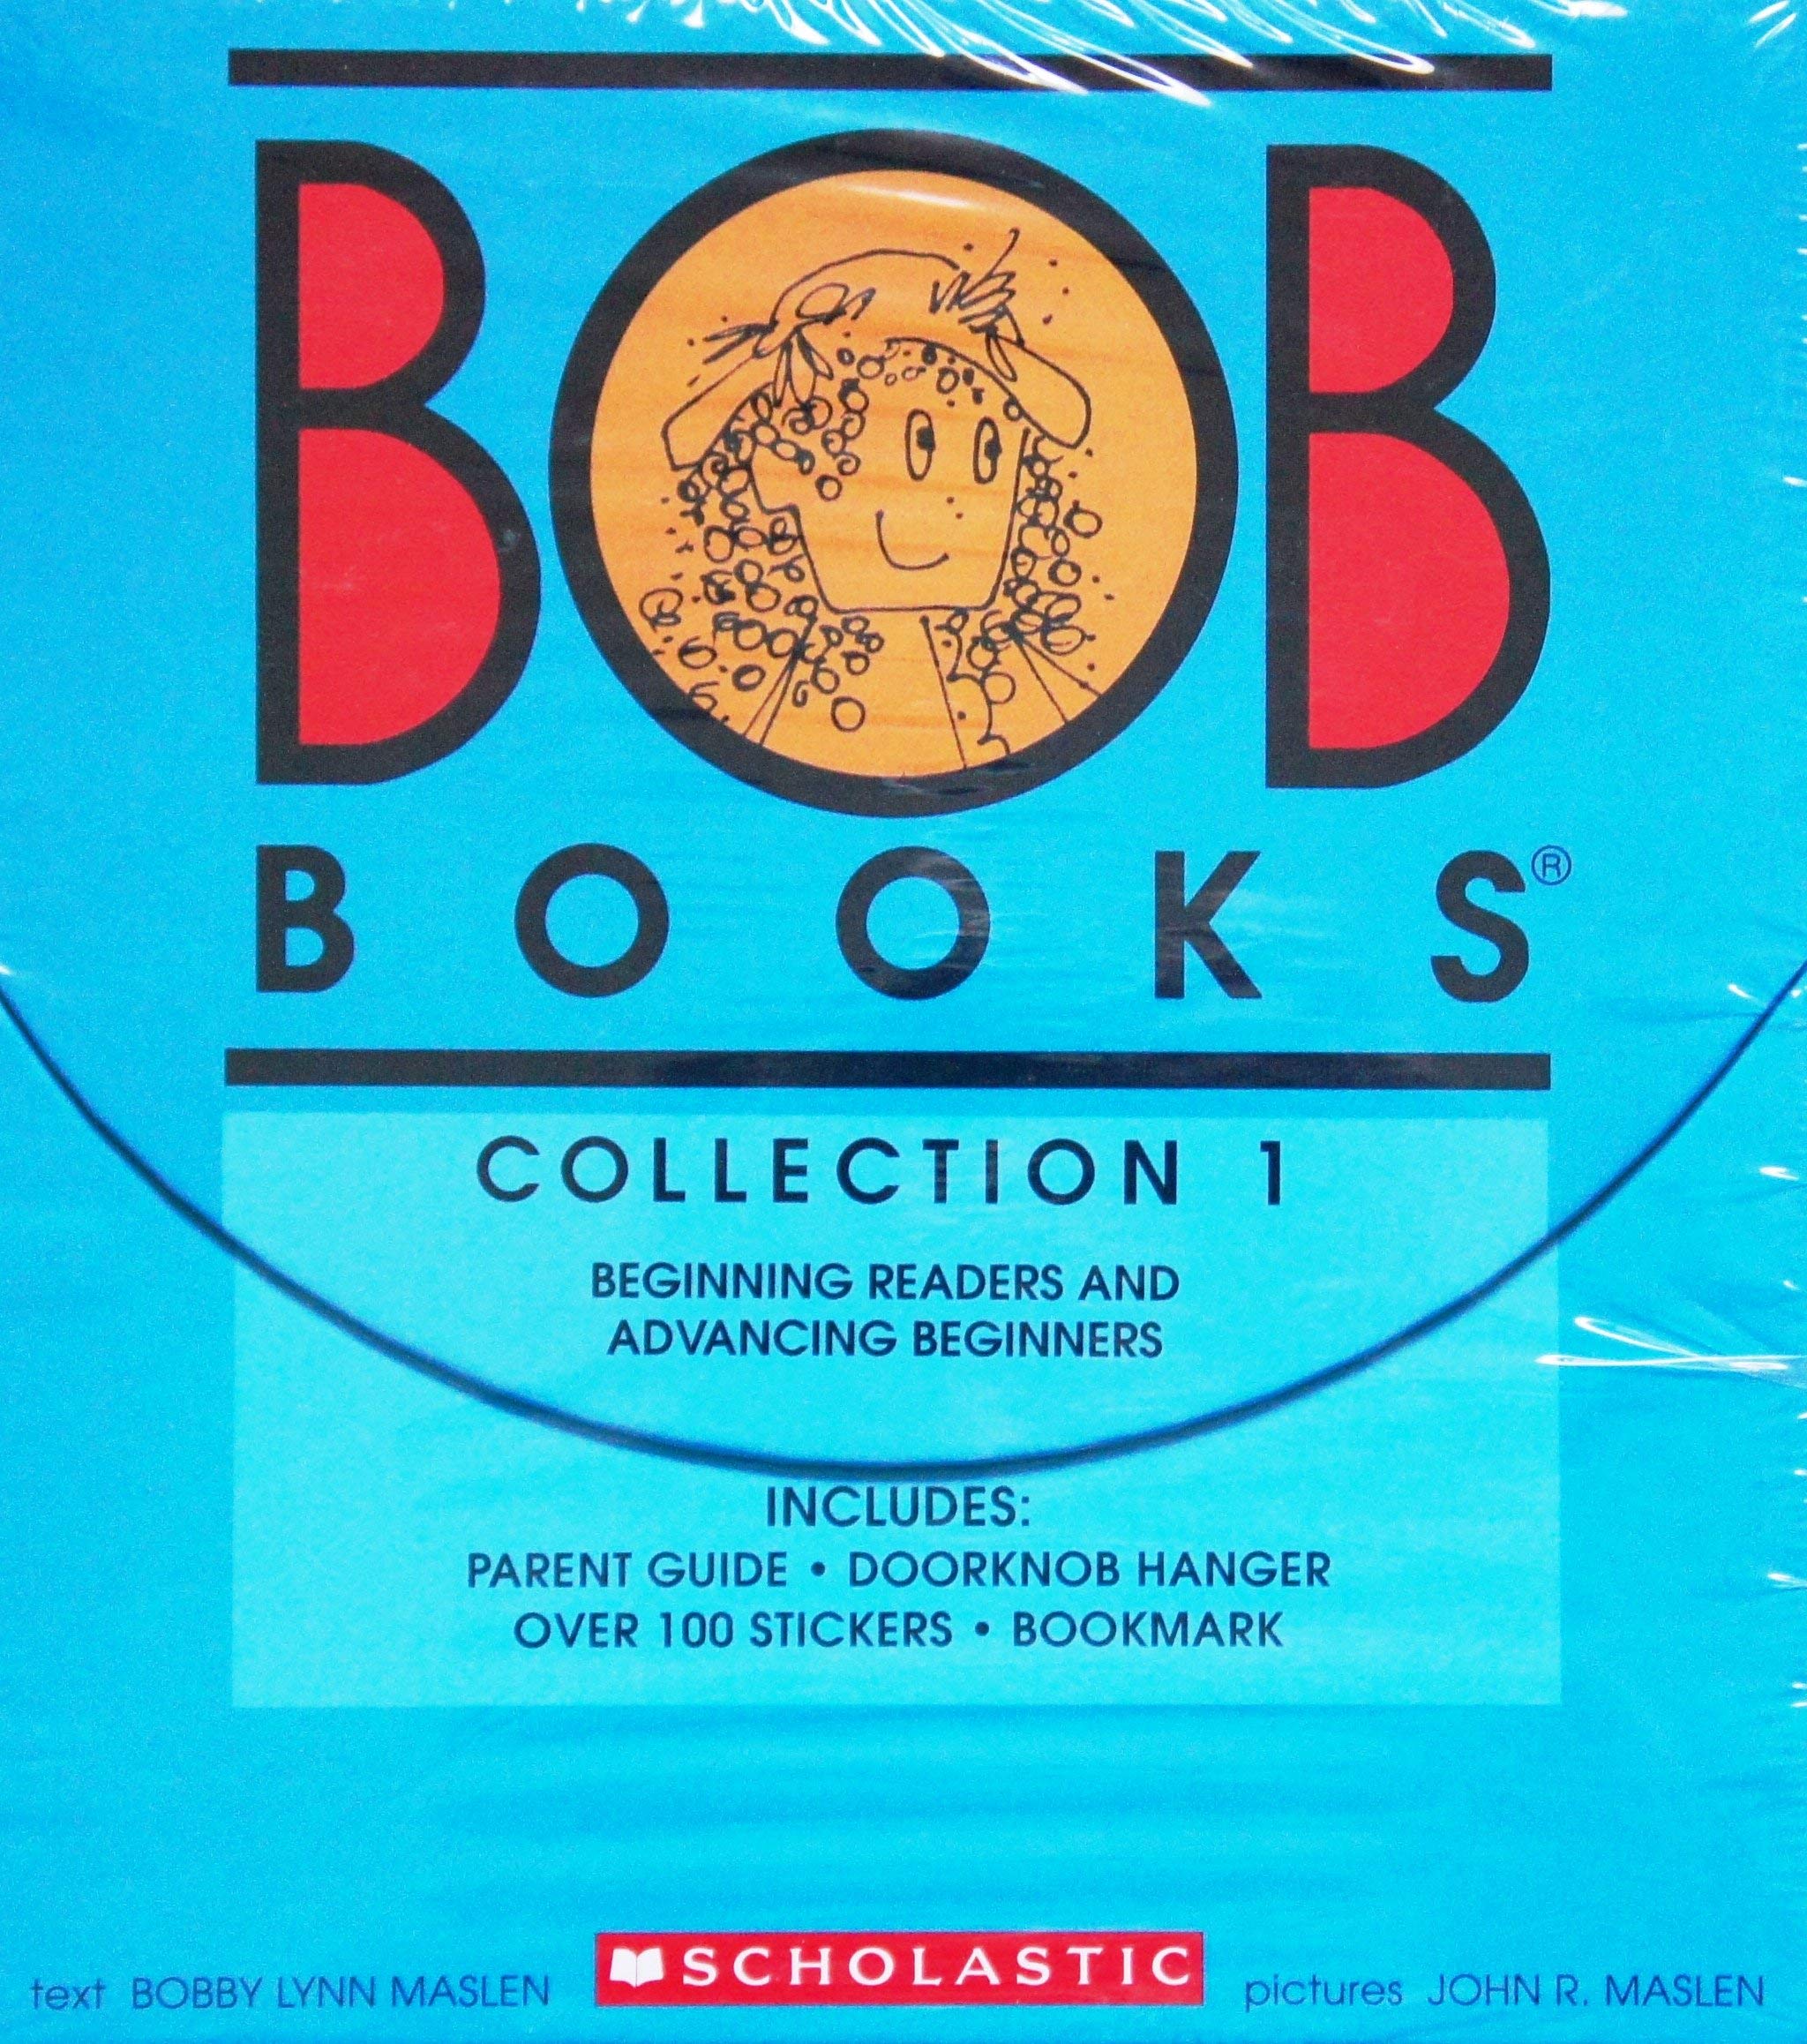 BOB Books COLLECTION 2 Box Set [ADVANCING BEGINNERS AND WORD FAMILIES]